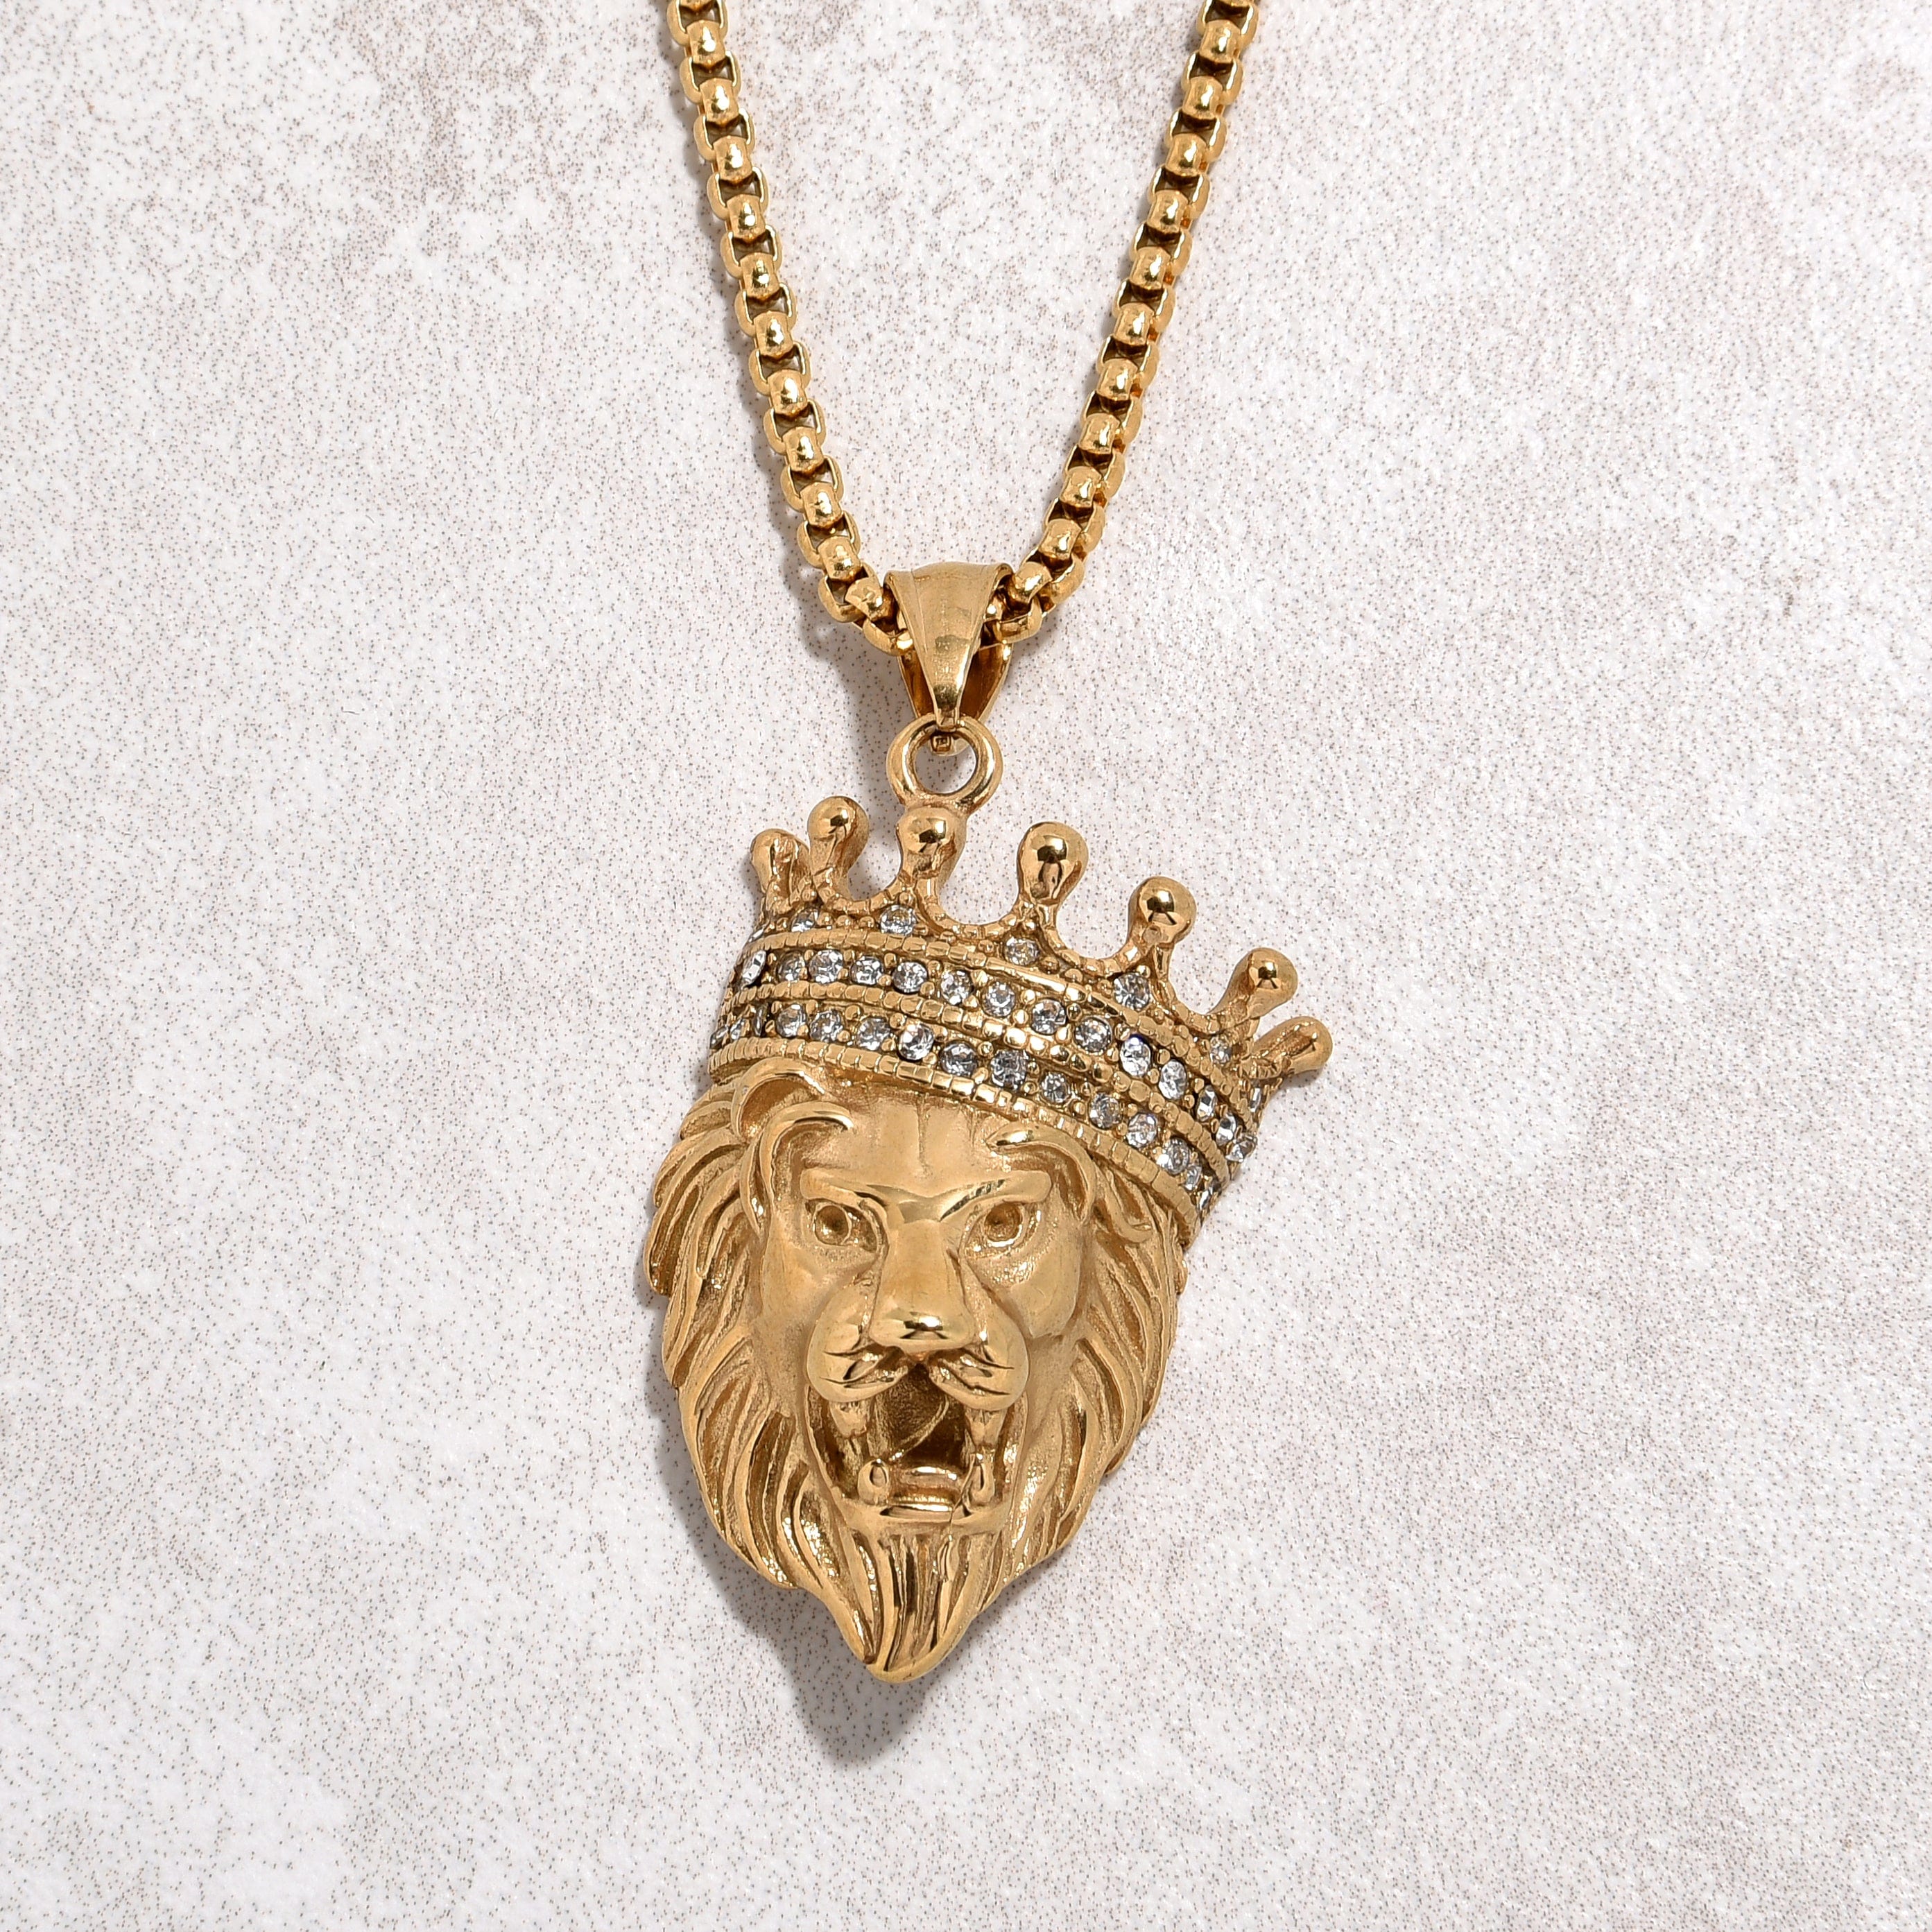 Kalifano Steel Hearts Jewelry Gold Lion Steel Hearts Necklace SHN520-G